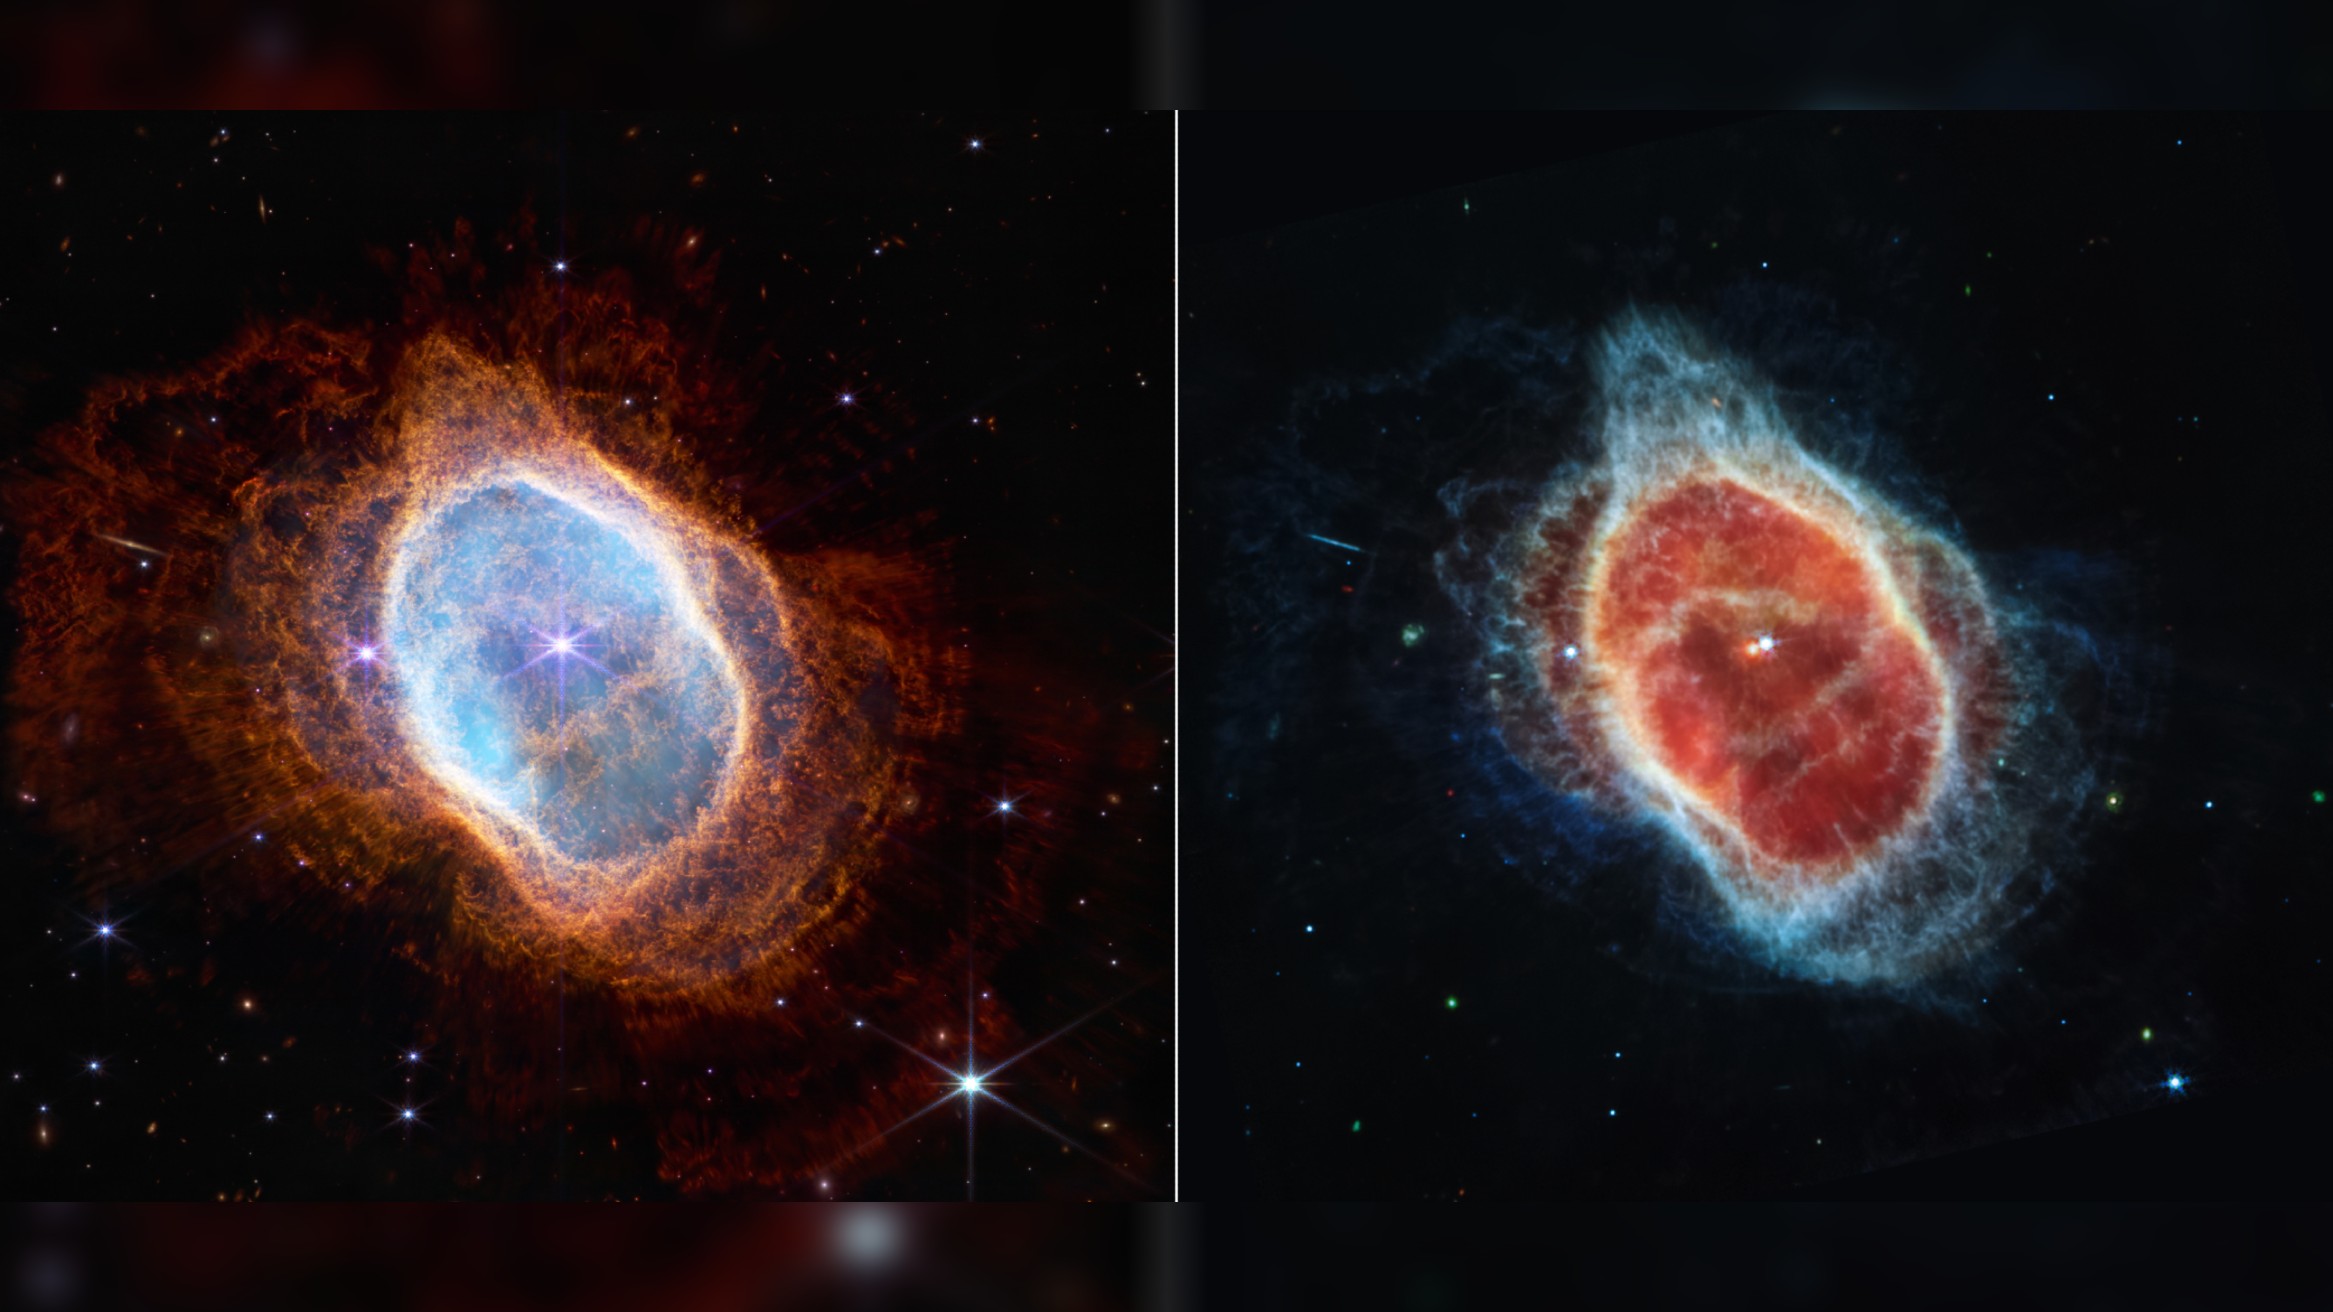 A side-by-side comparison of images of the southern ring nebula taken in near-infrared (left) and mid-infrared (right).  The left image shows whipped orange bands of gas and dust surrounding an oval shape 